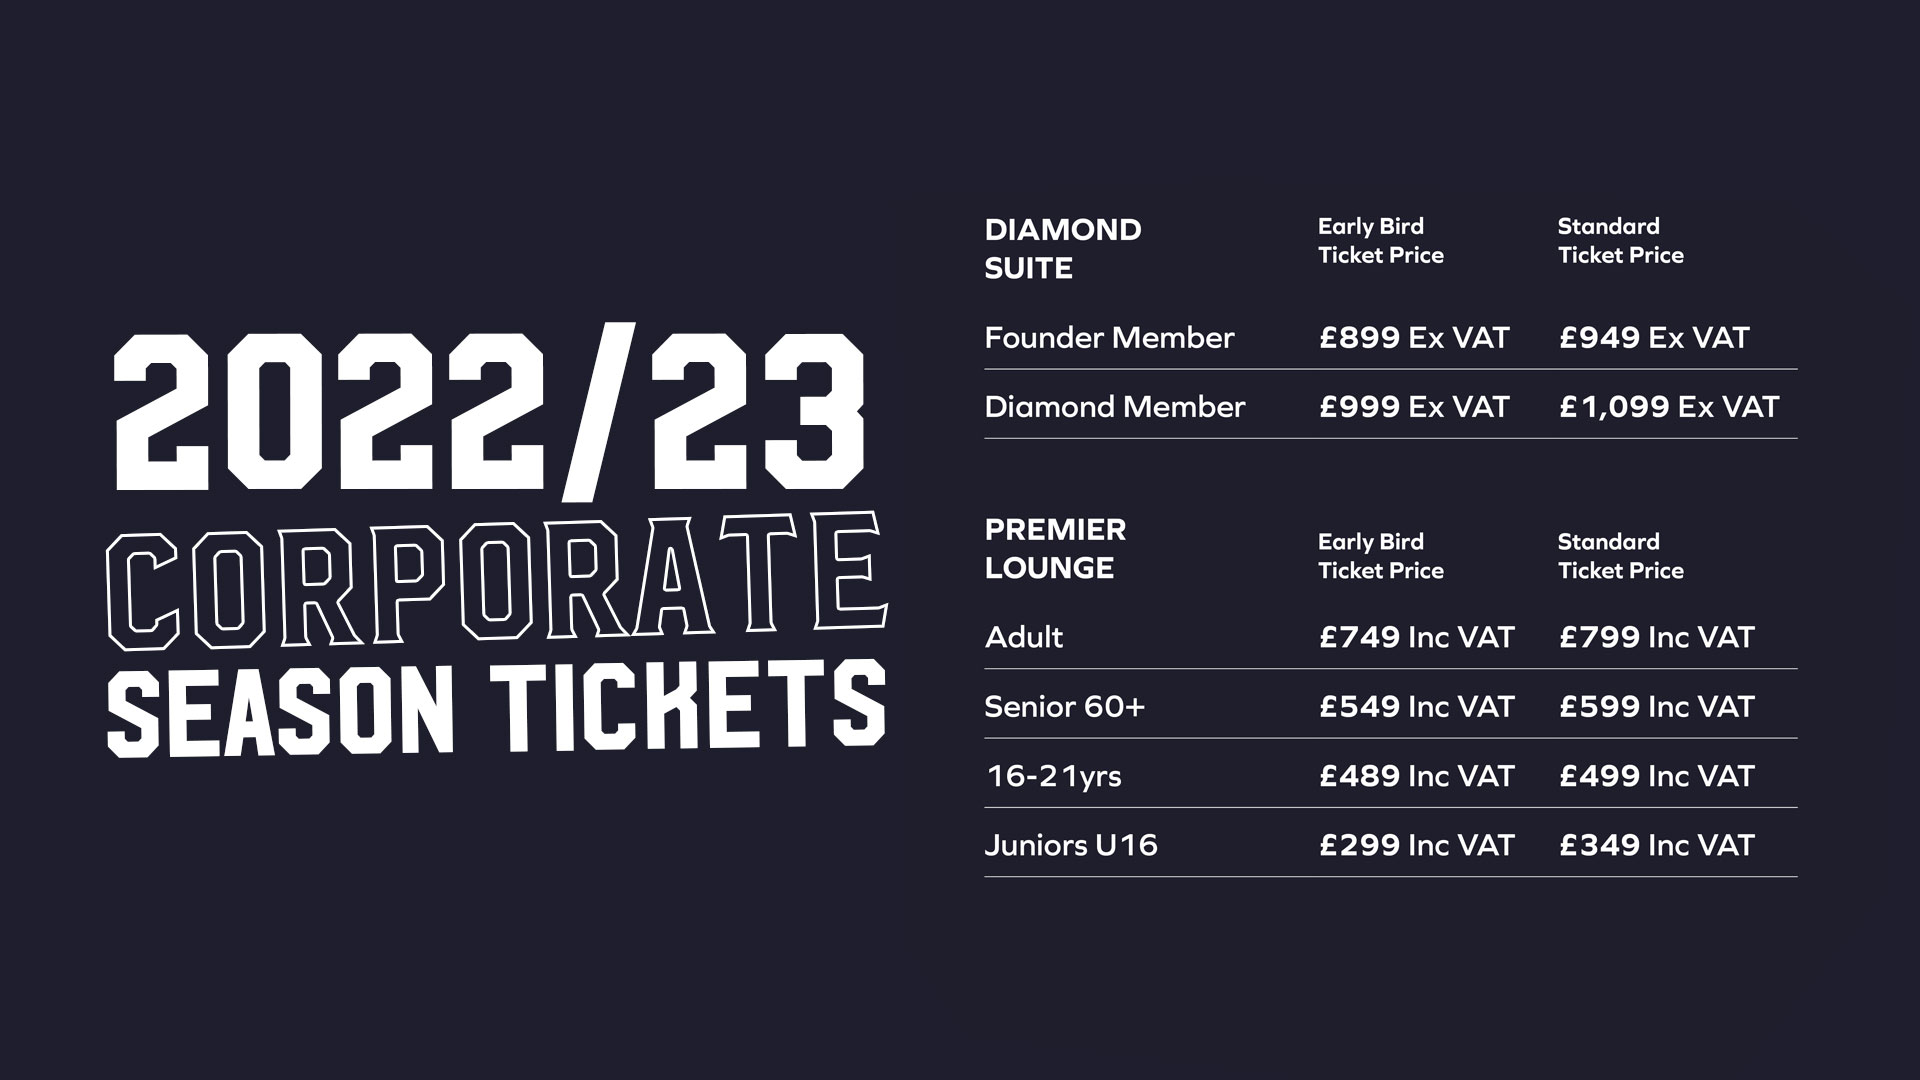 Season Tickets are on sale from 10am on Friday, April 22nd, 2022...